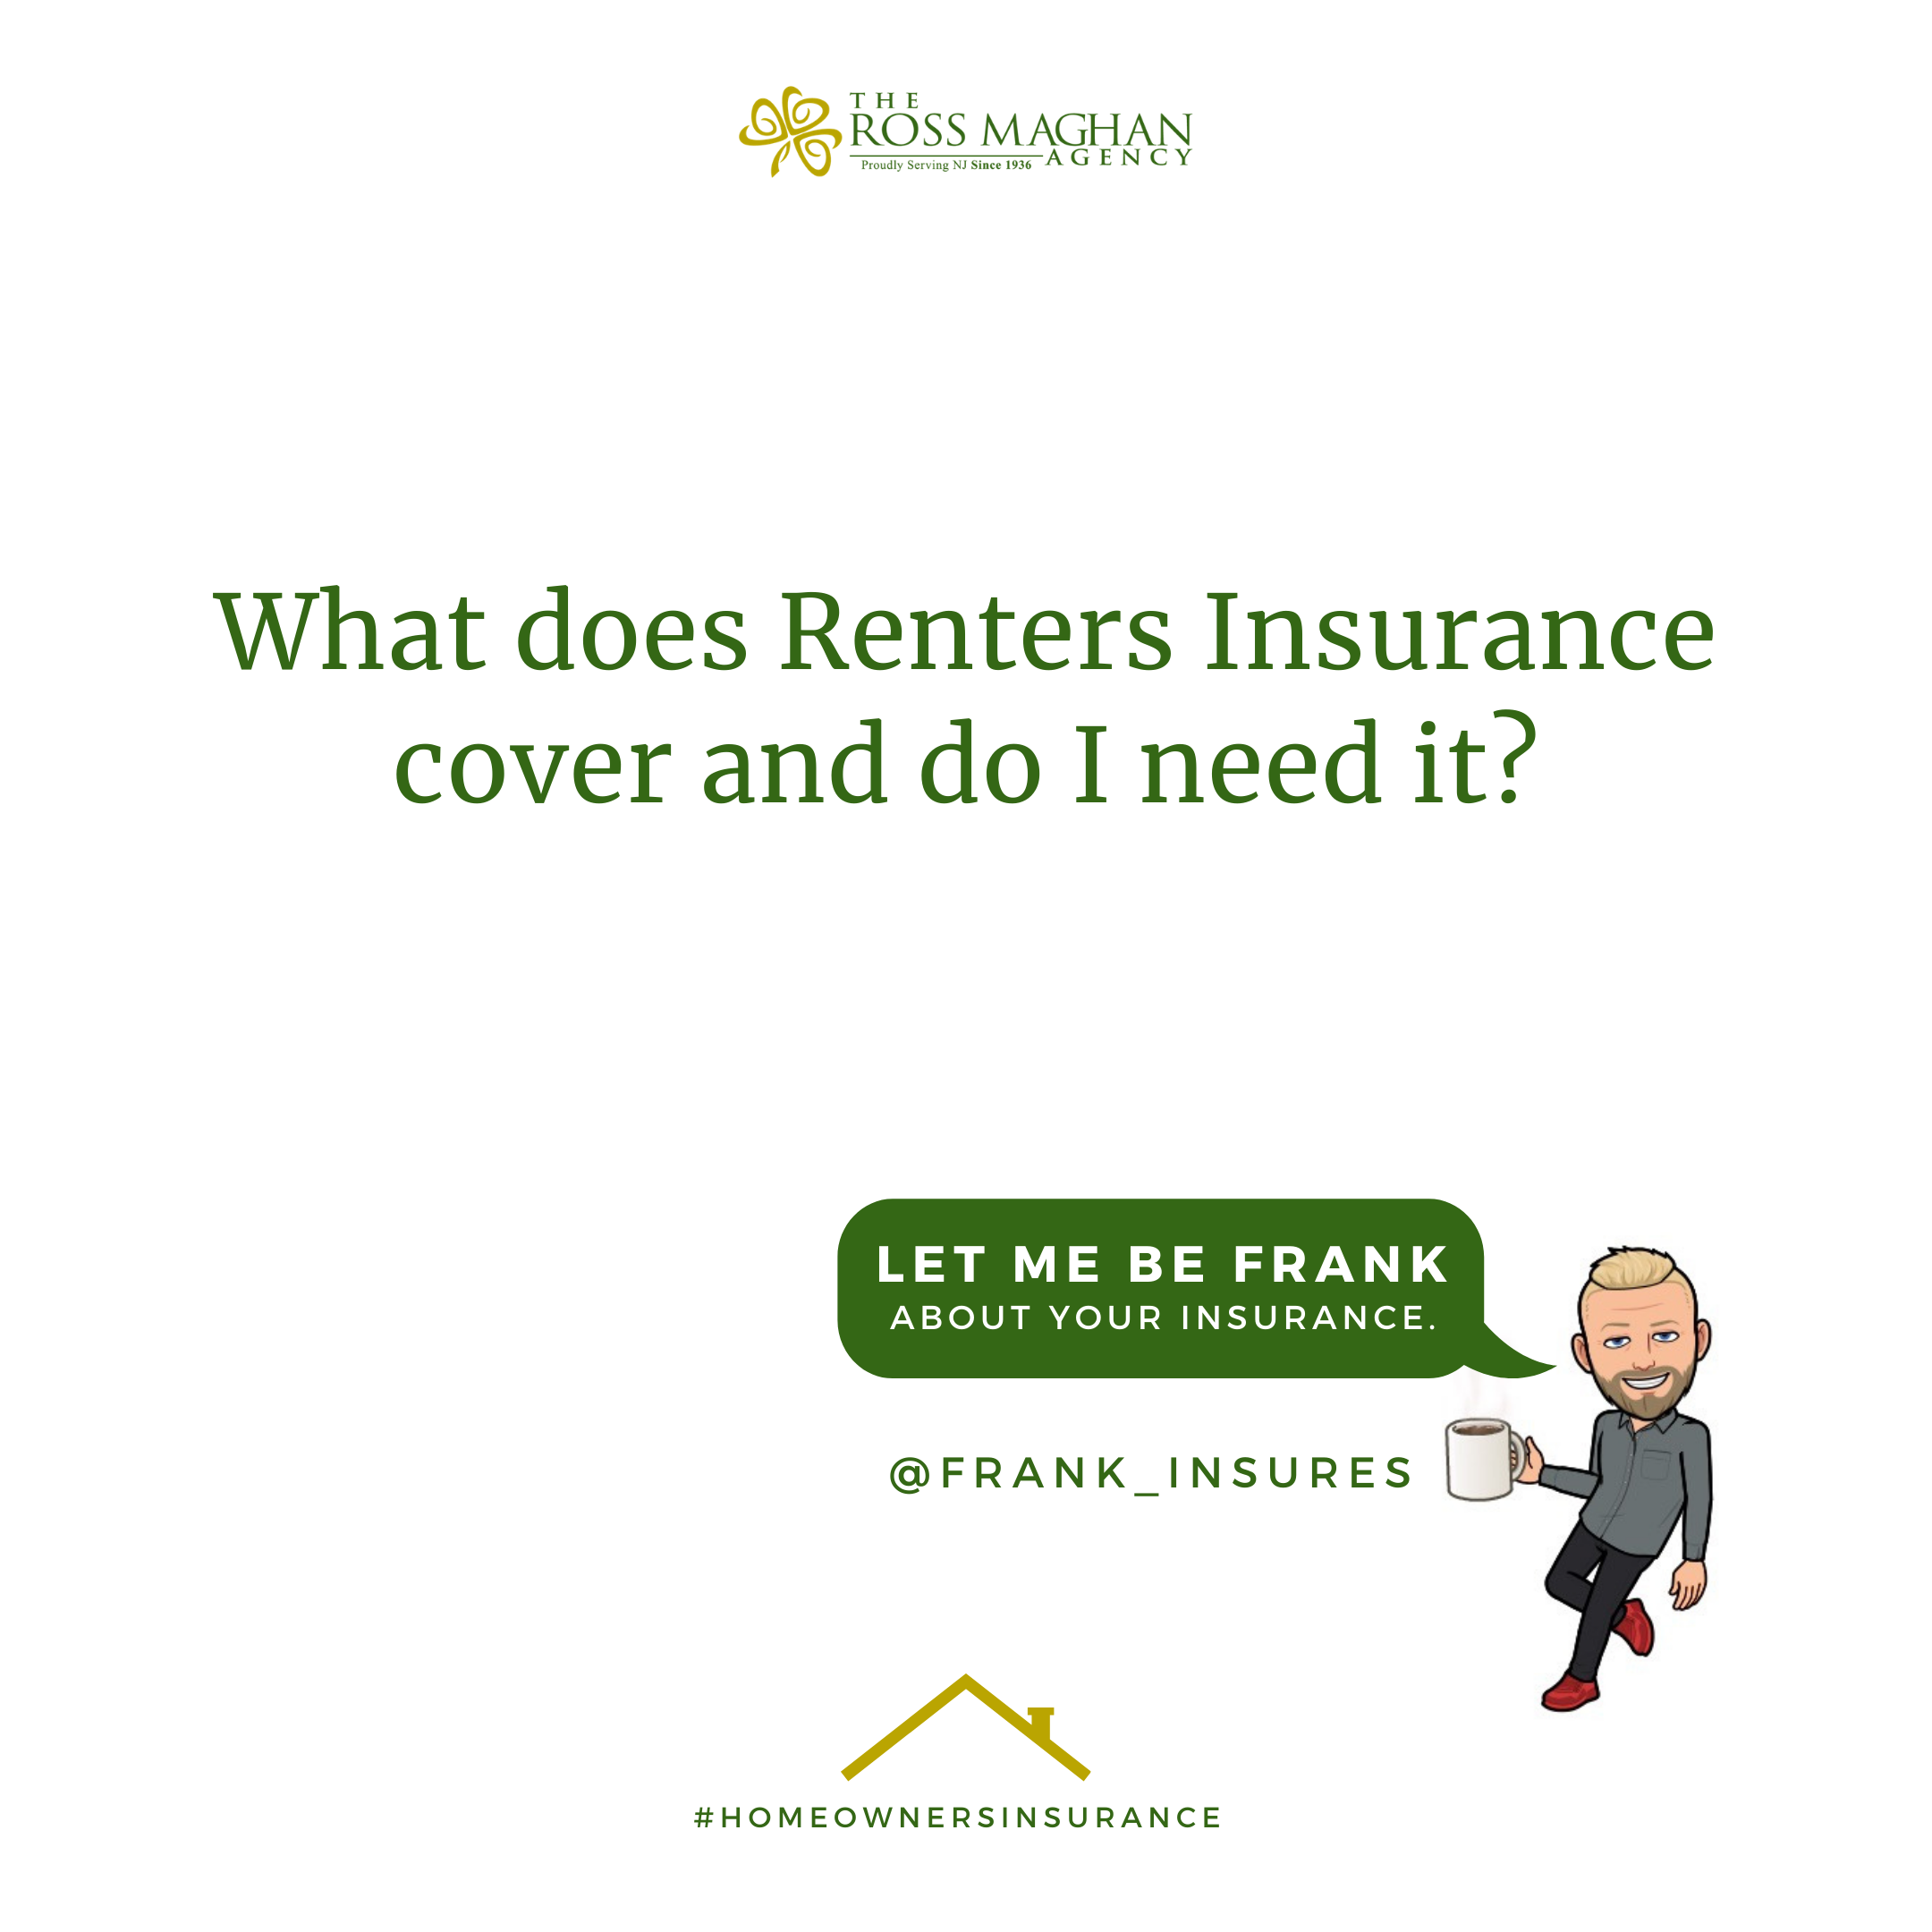 Featured image for “What does Renters Insurance cover and do I need it?”